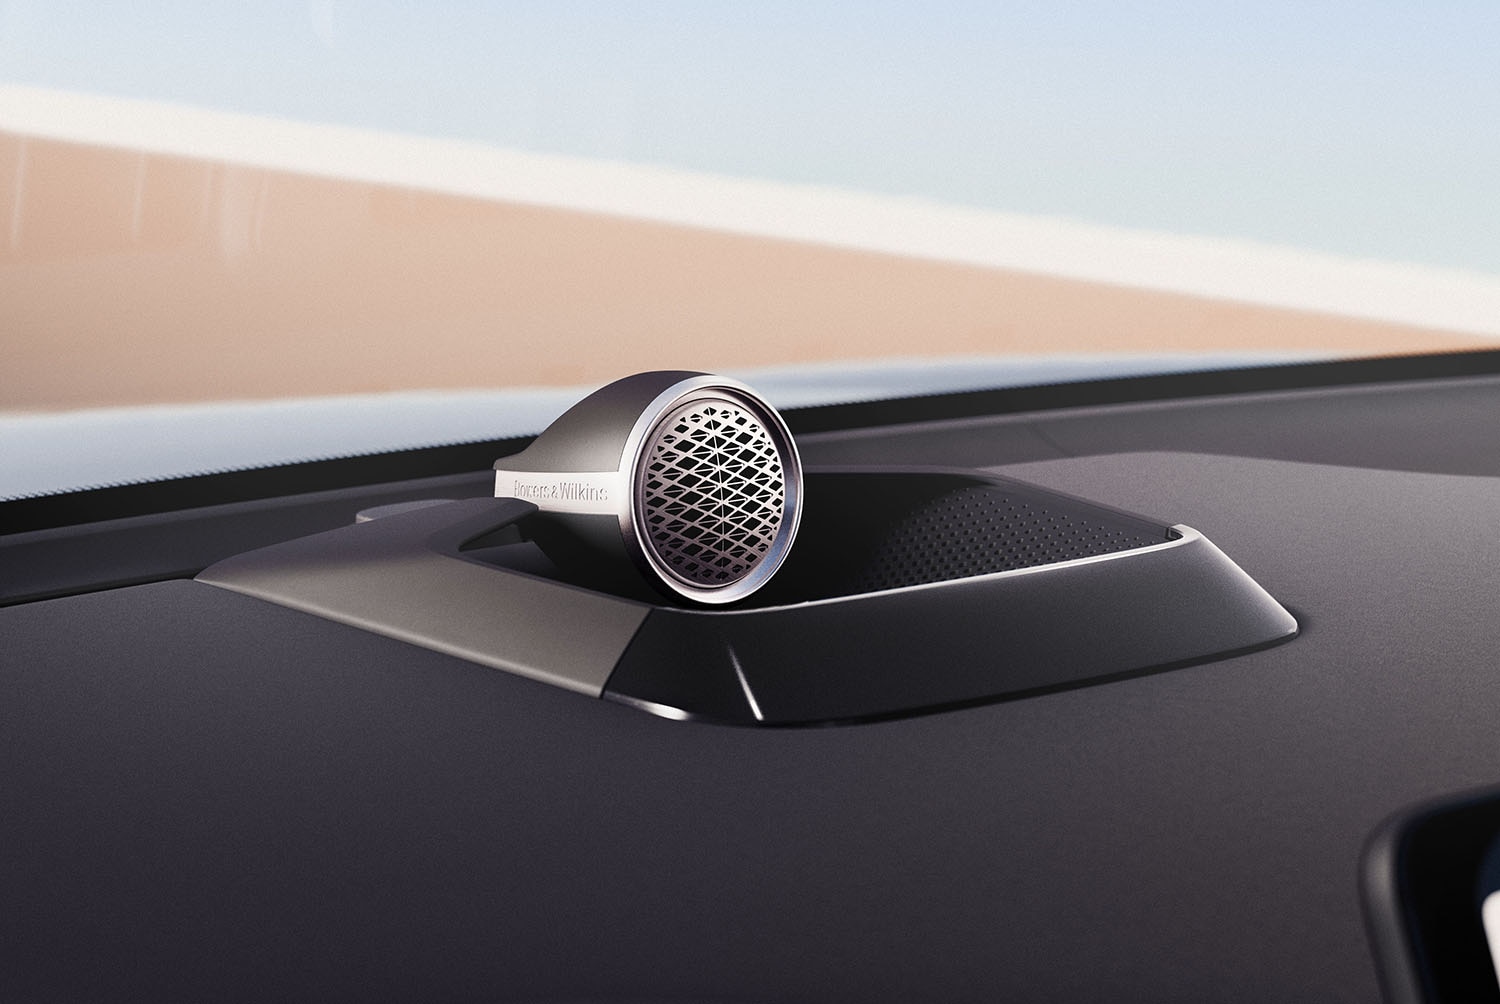 Bowers undefined Wilkins-branded circular stand-up speaker inside a Volvo